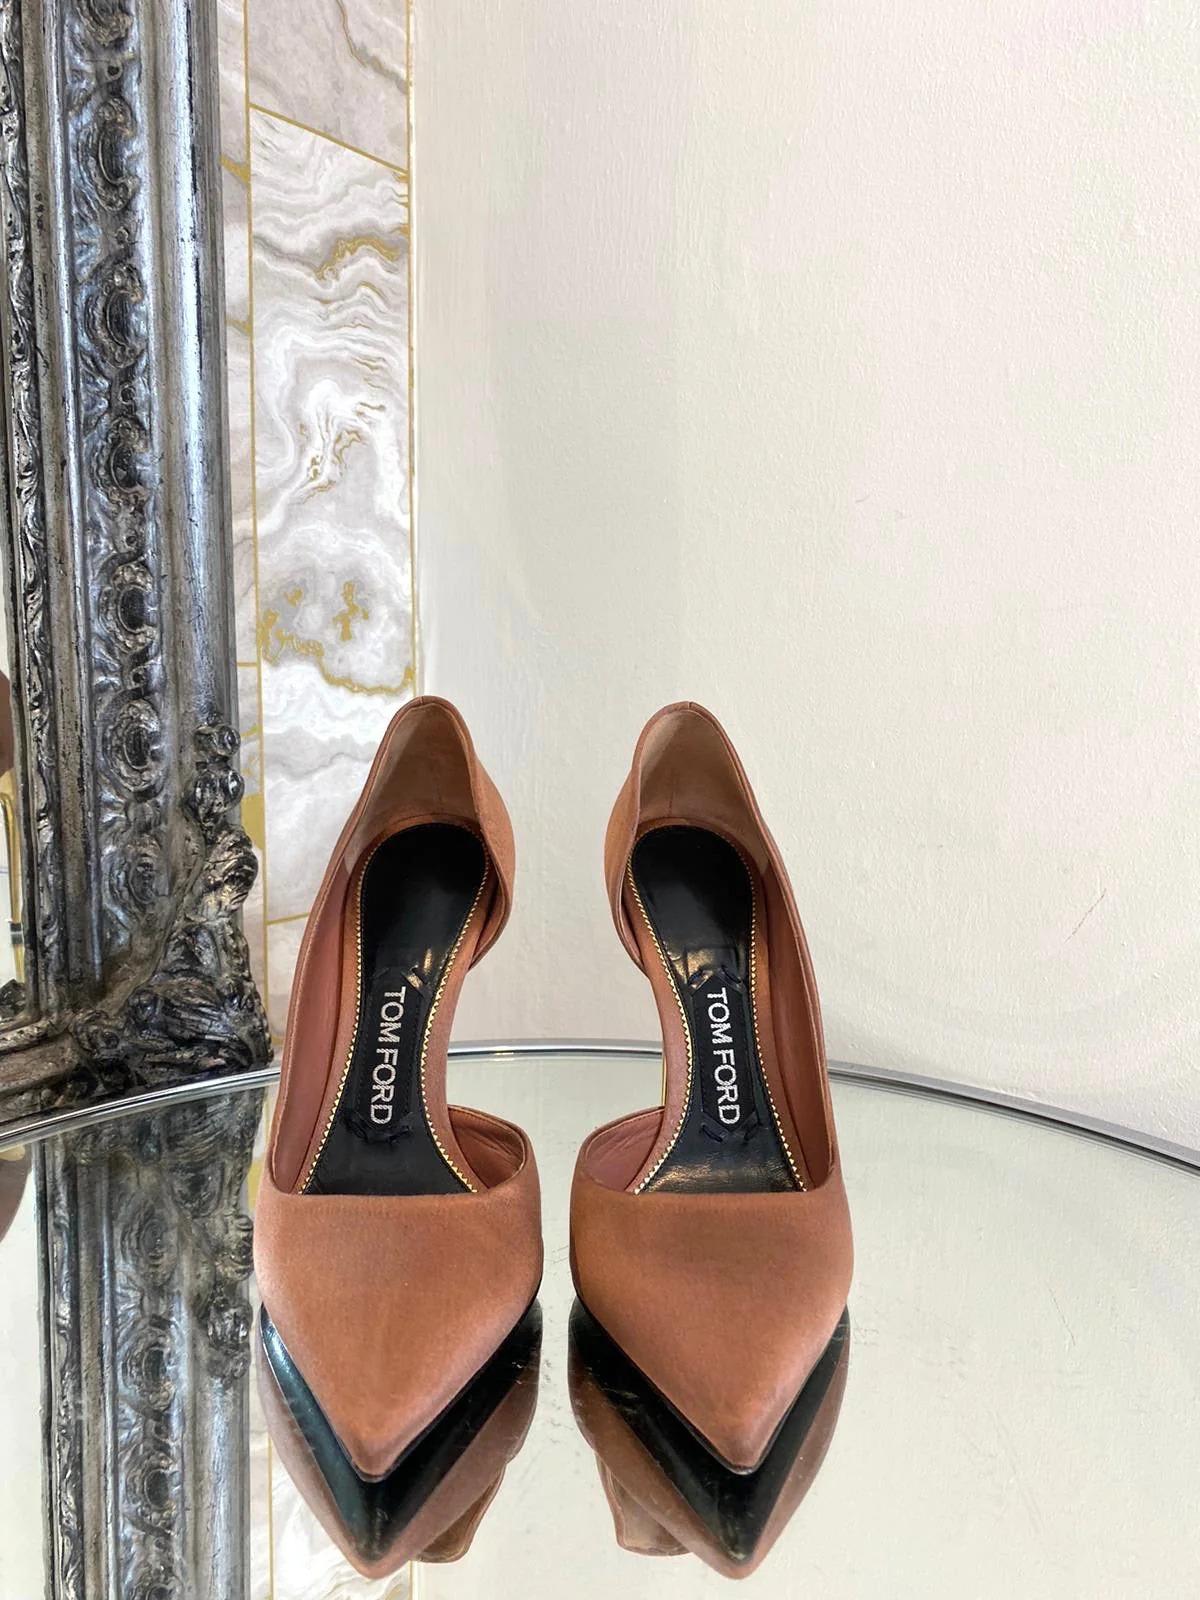 Women's Tom Ford D'Orsay Satin Heels For Sale